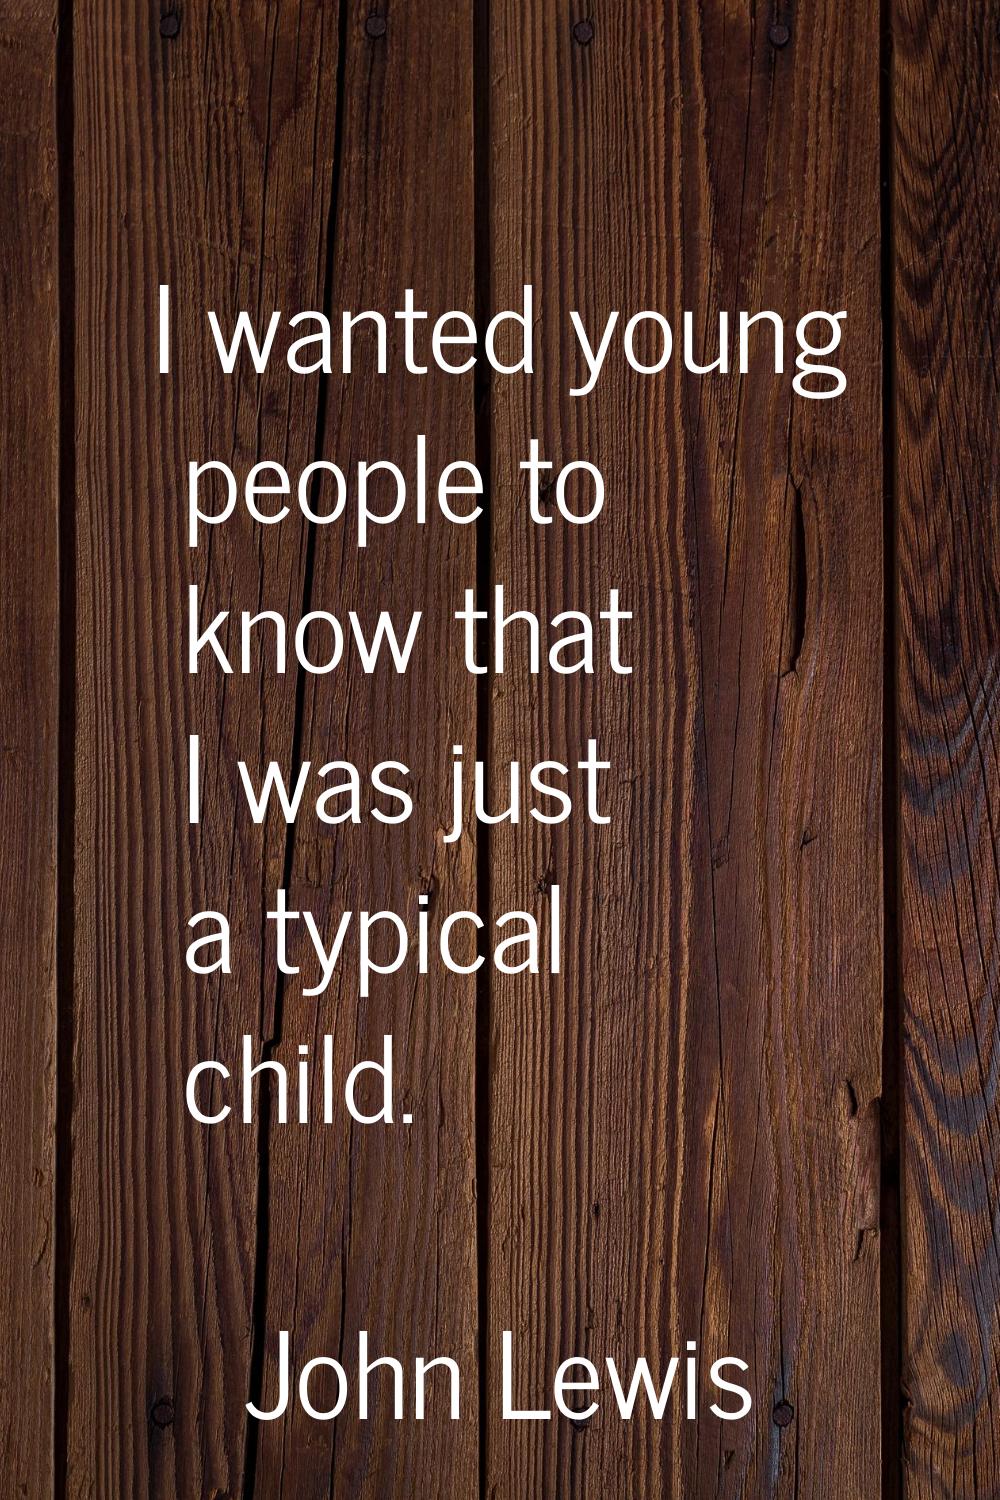 I wanted young people to know that I was just a typical child.